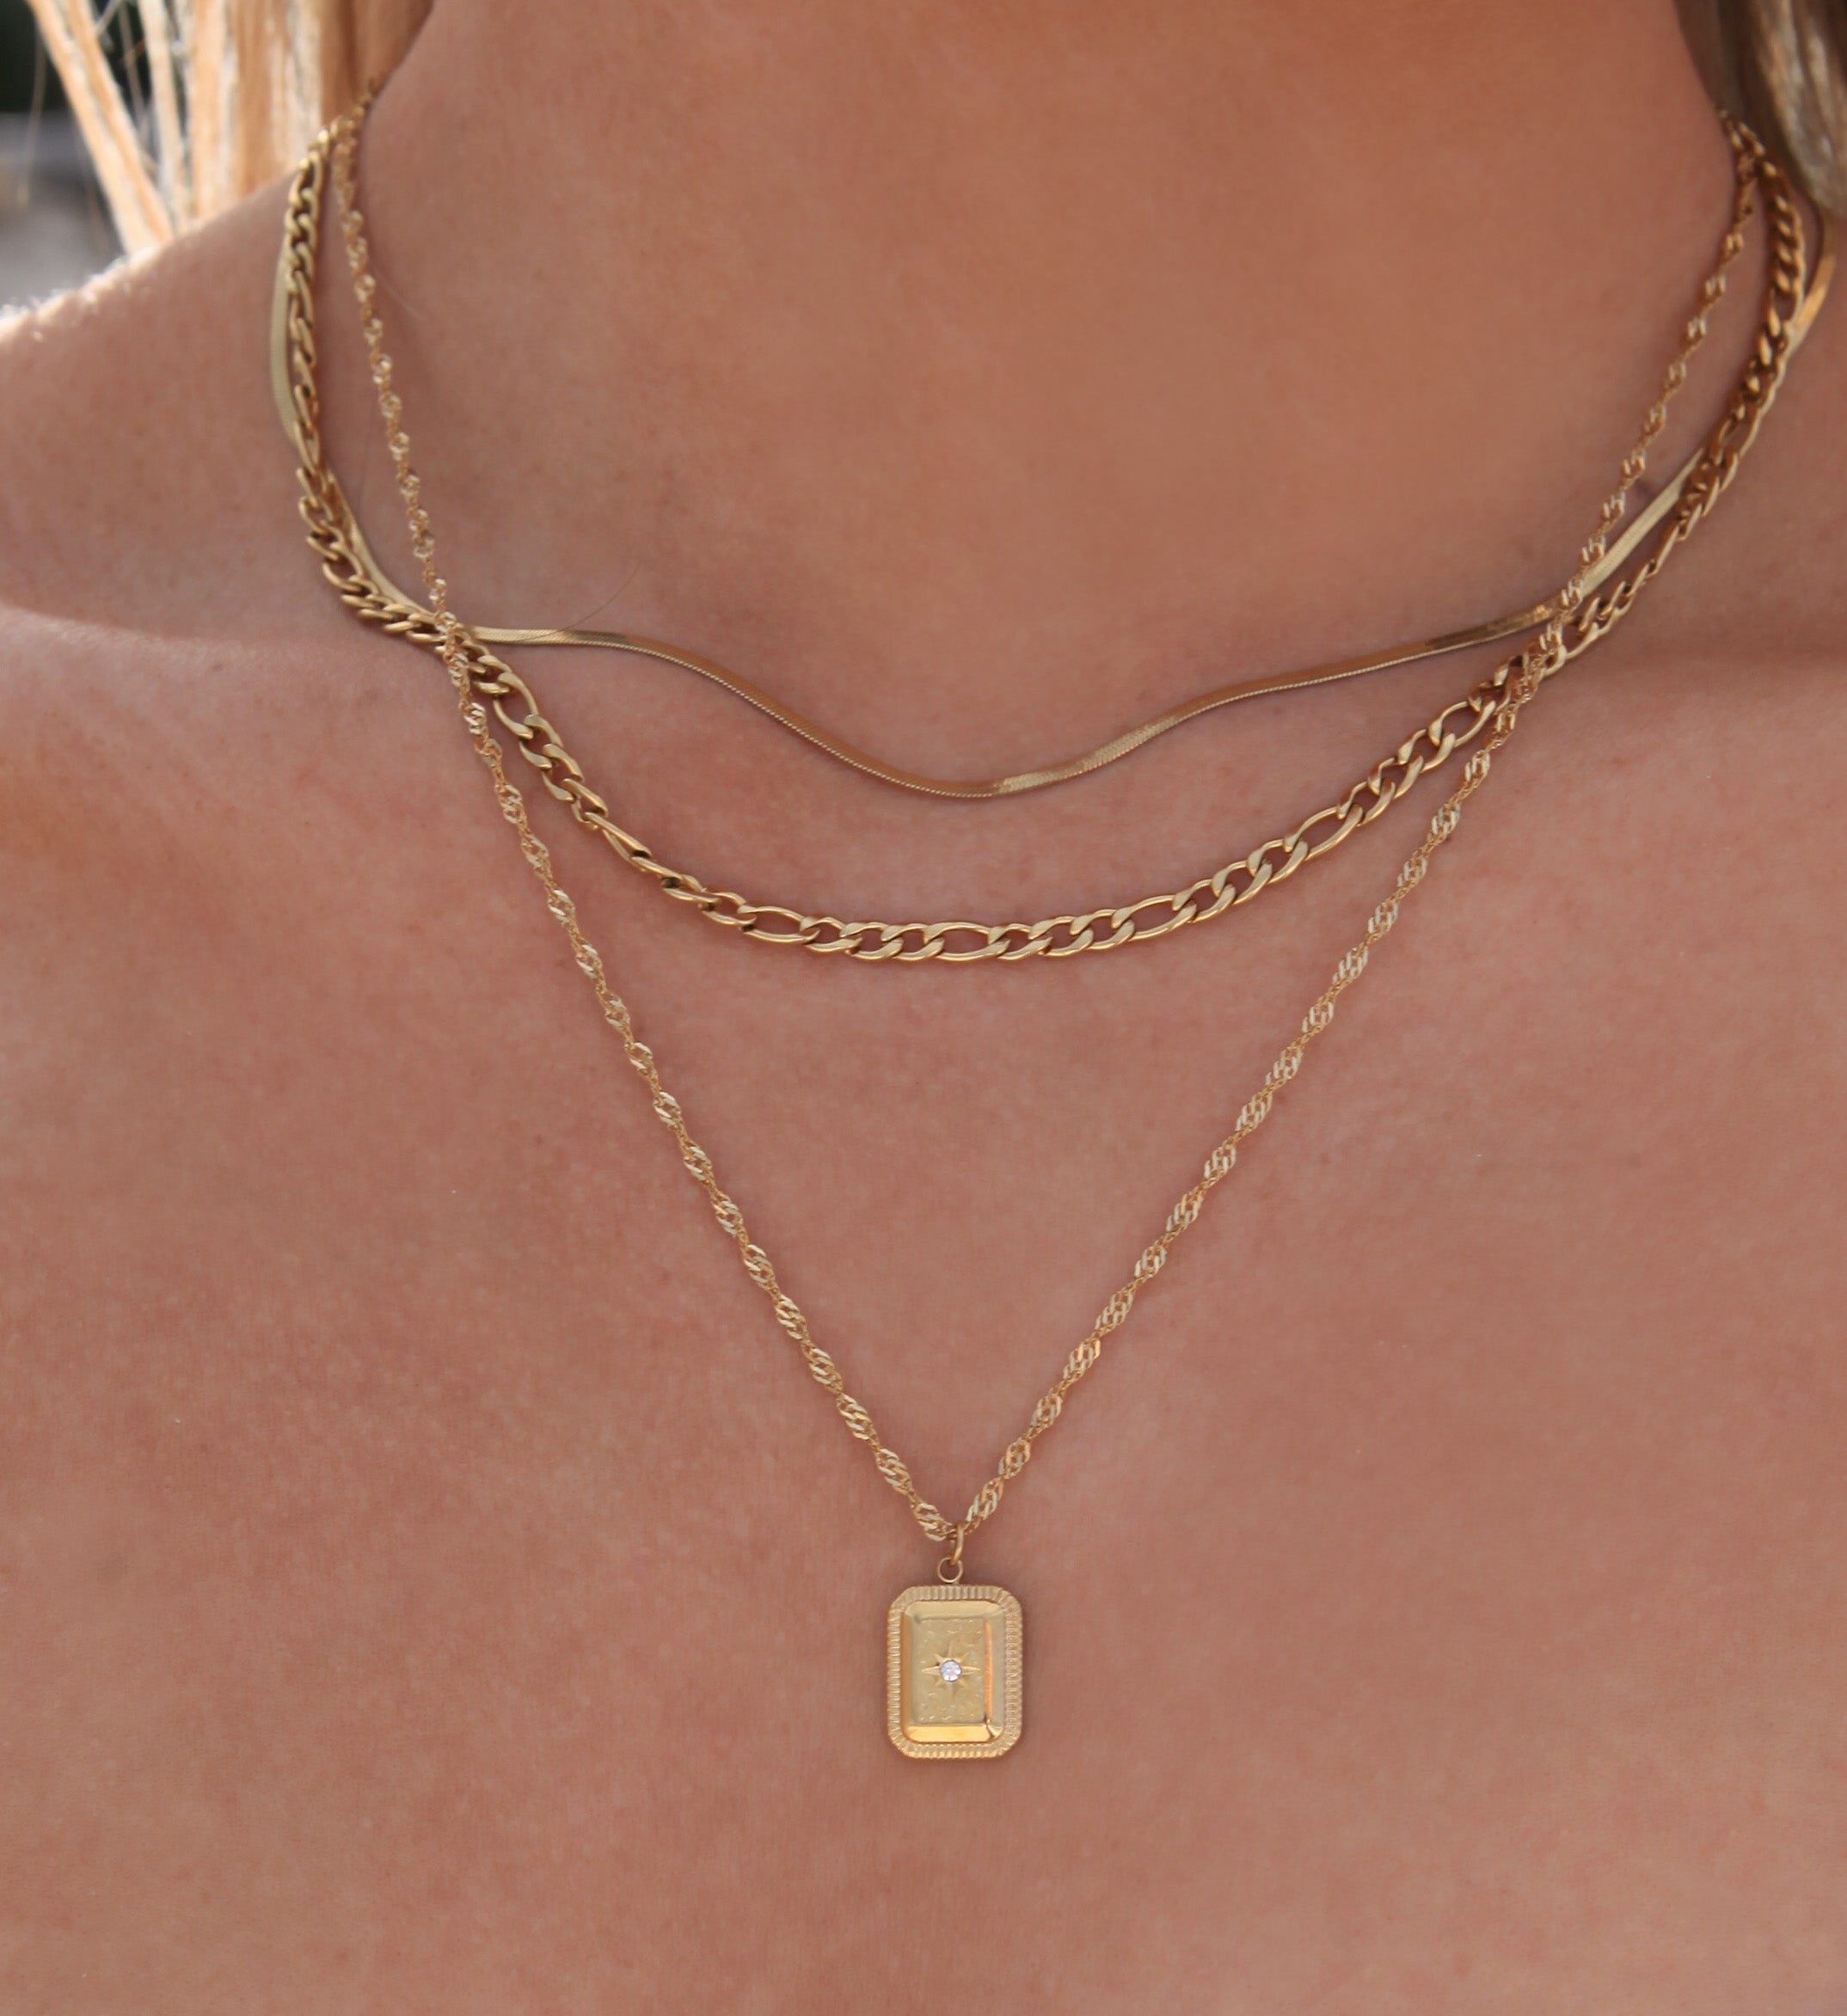 Taylor - 18k Gold Curl Chain Necklace